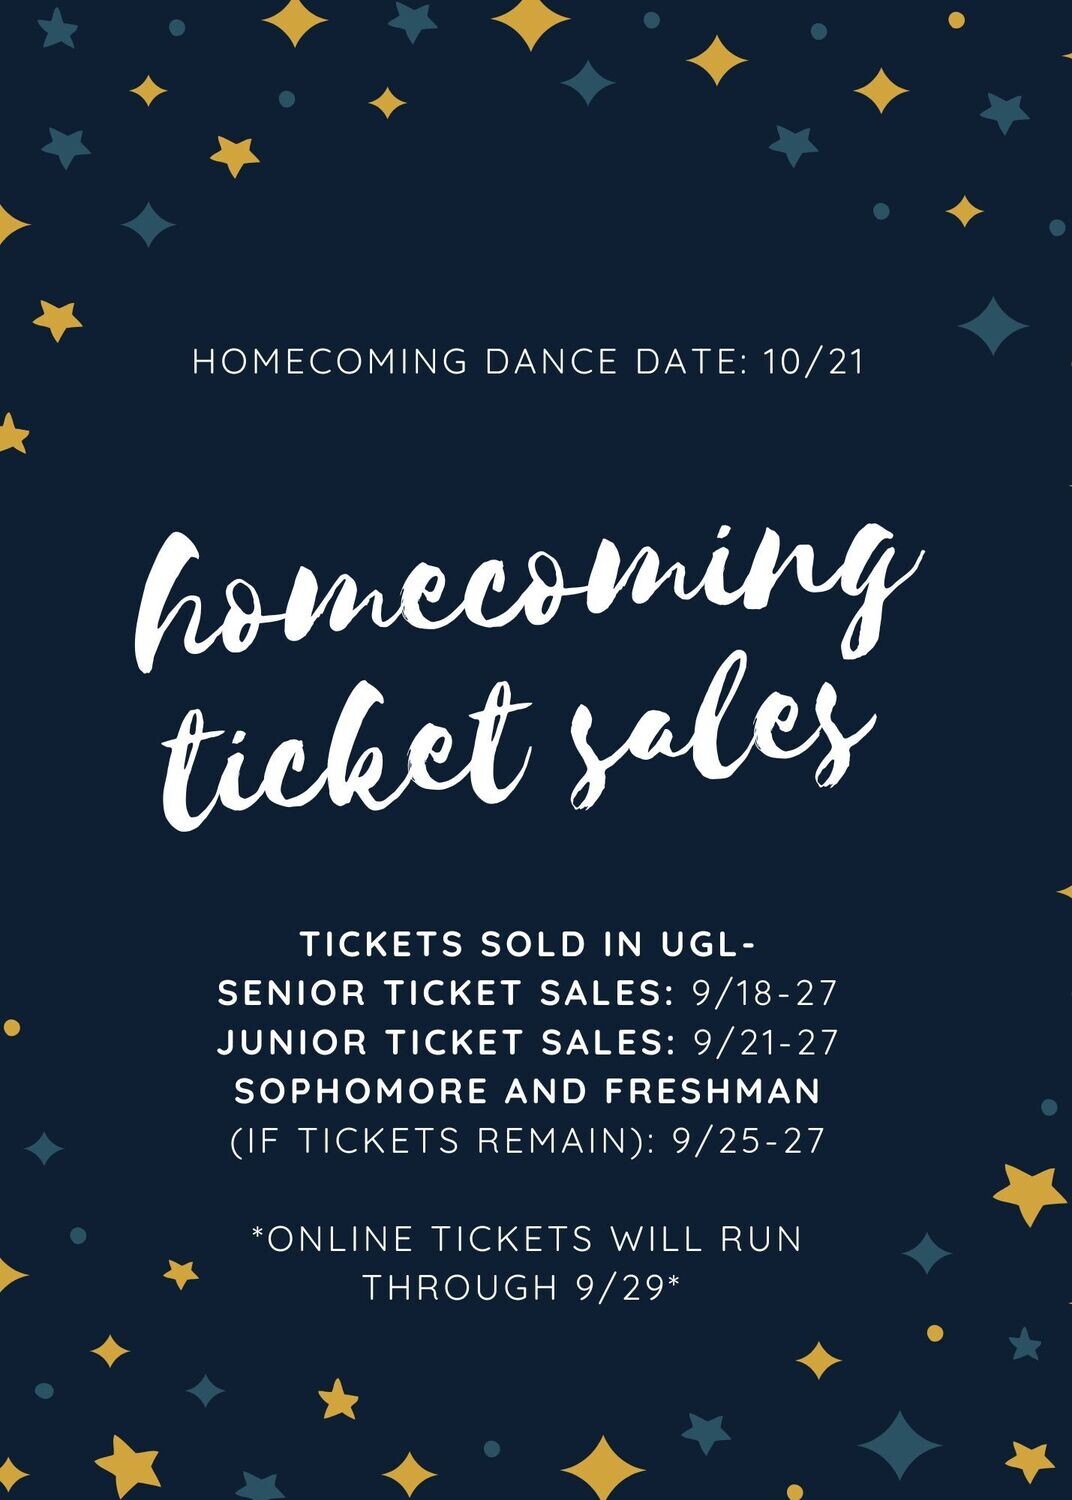 Homecoming Dance Tickets 
275 Tickets remaining will be sold night of the dance. 
First Come, First Served.